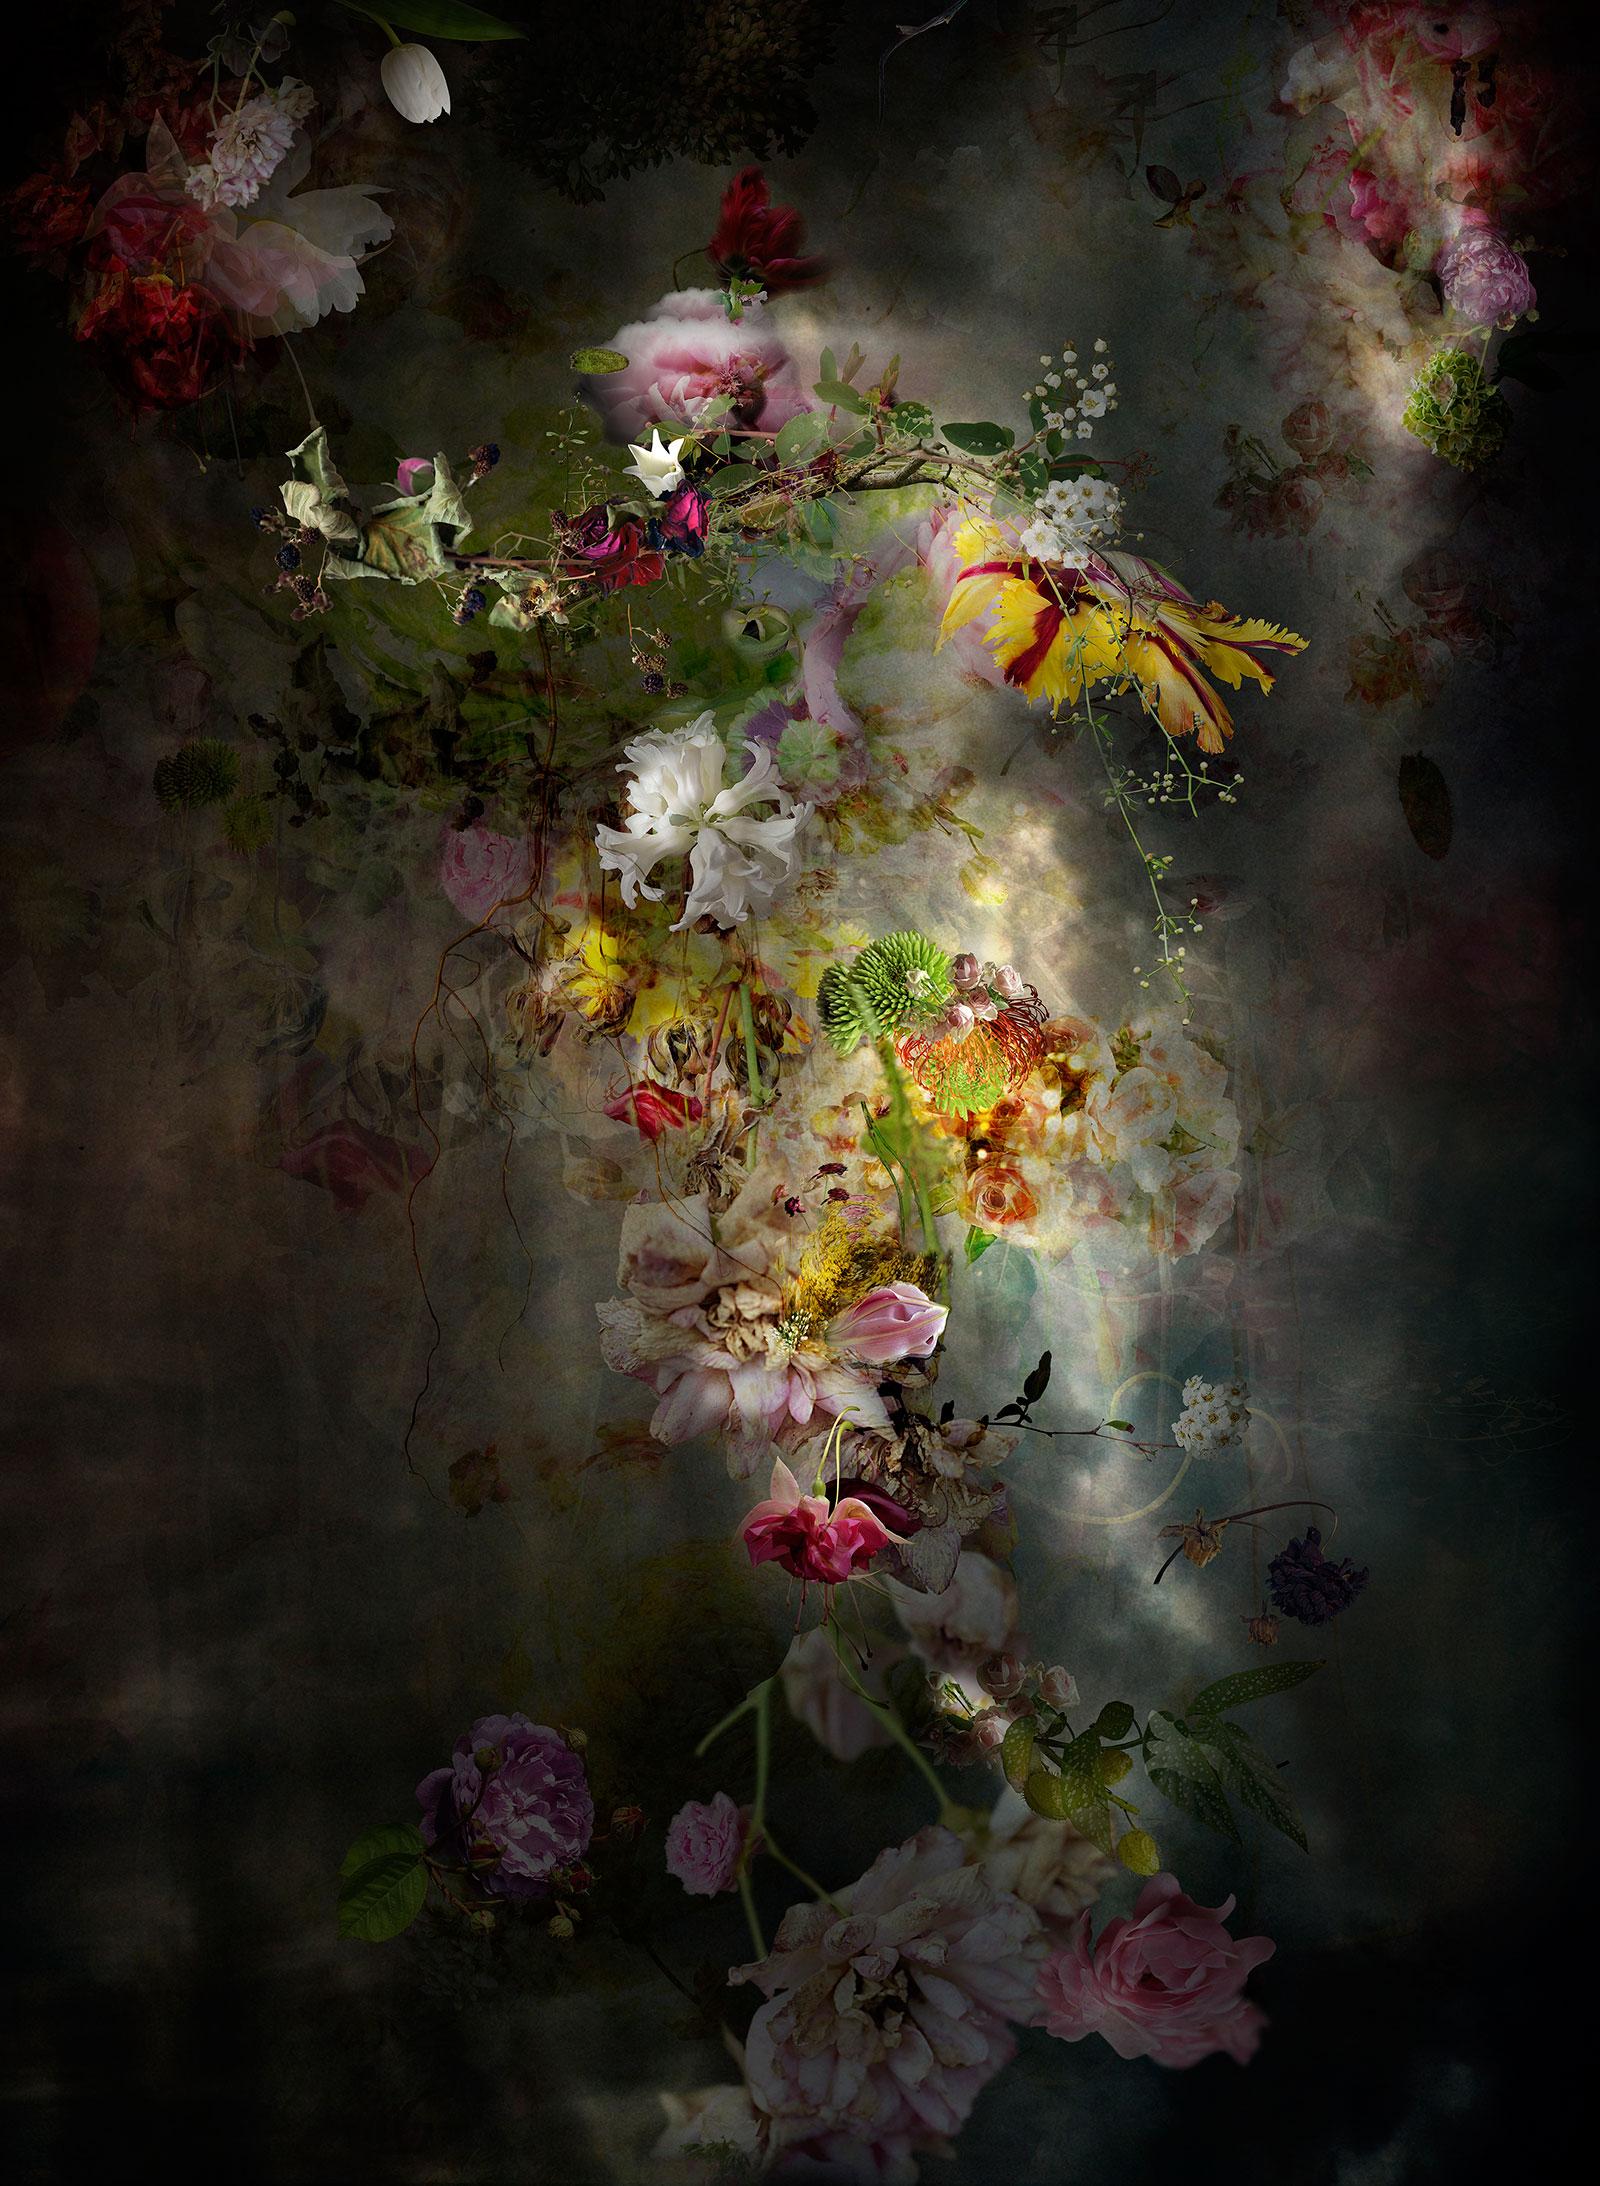 Isabelle Menin Still-Life Photograph - Solstice #7 - Vertical Floral dark abstract landscape contemporary photograph